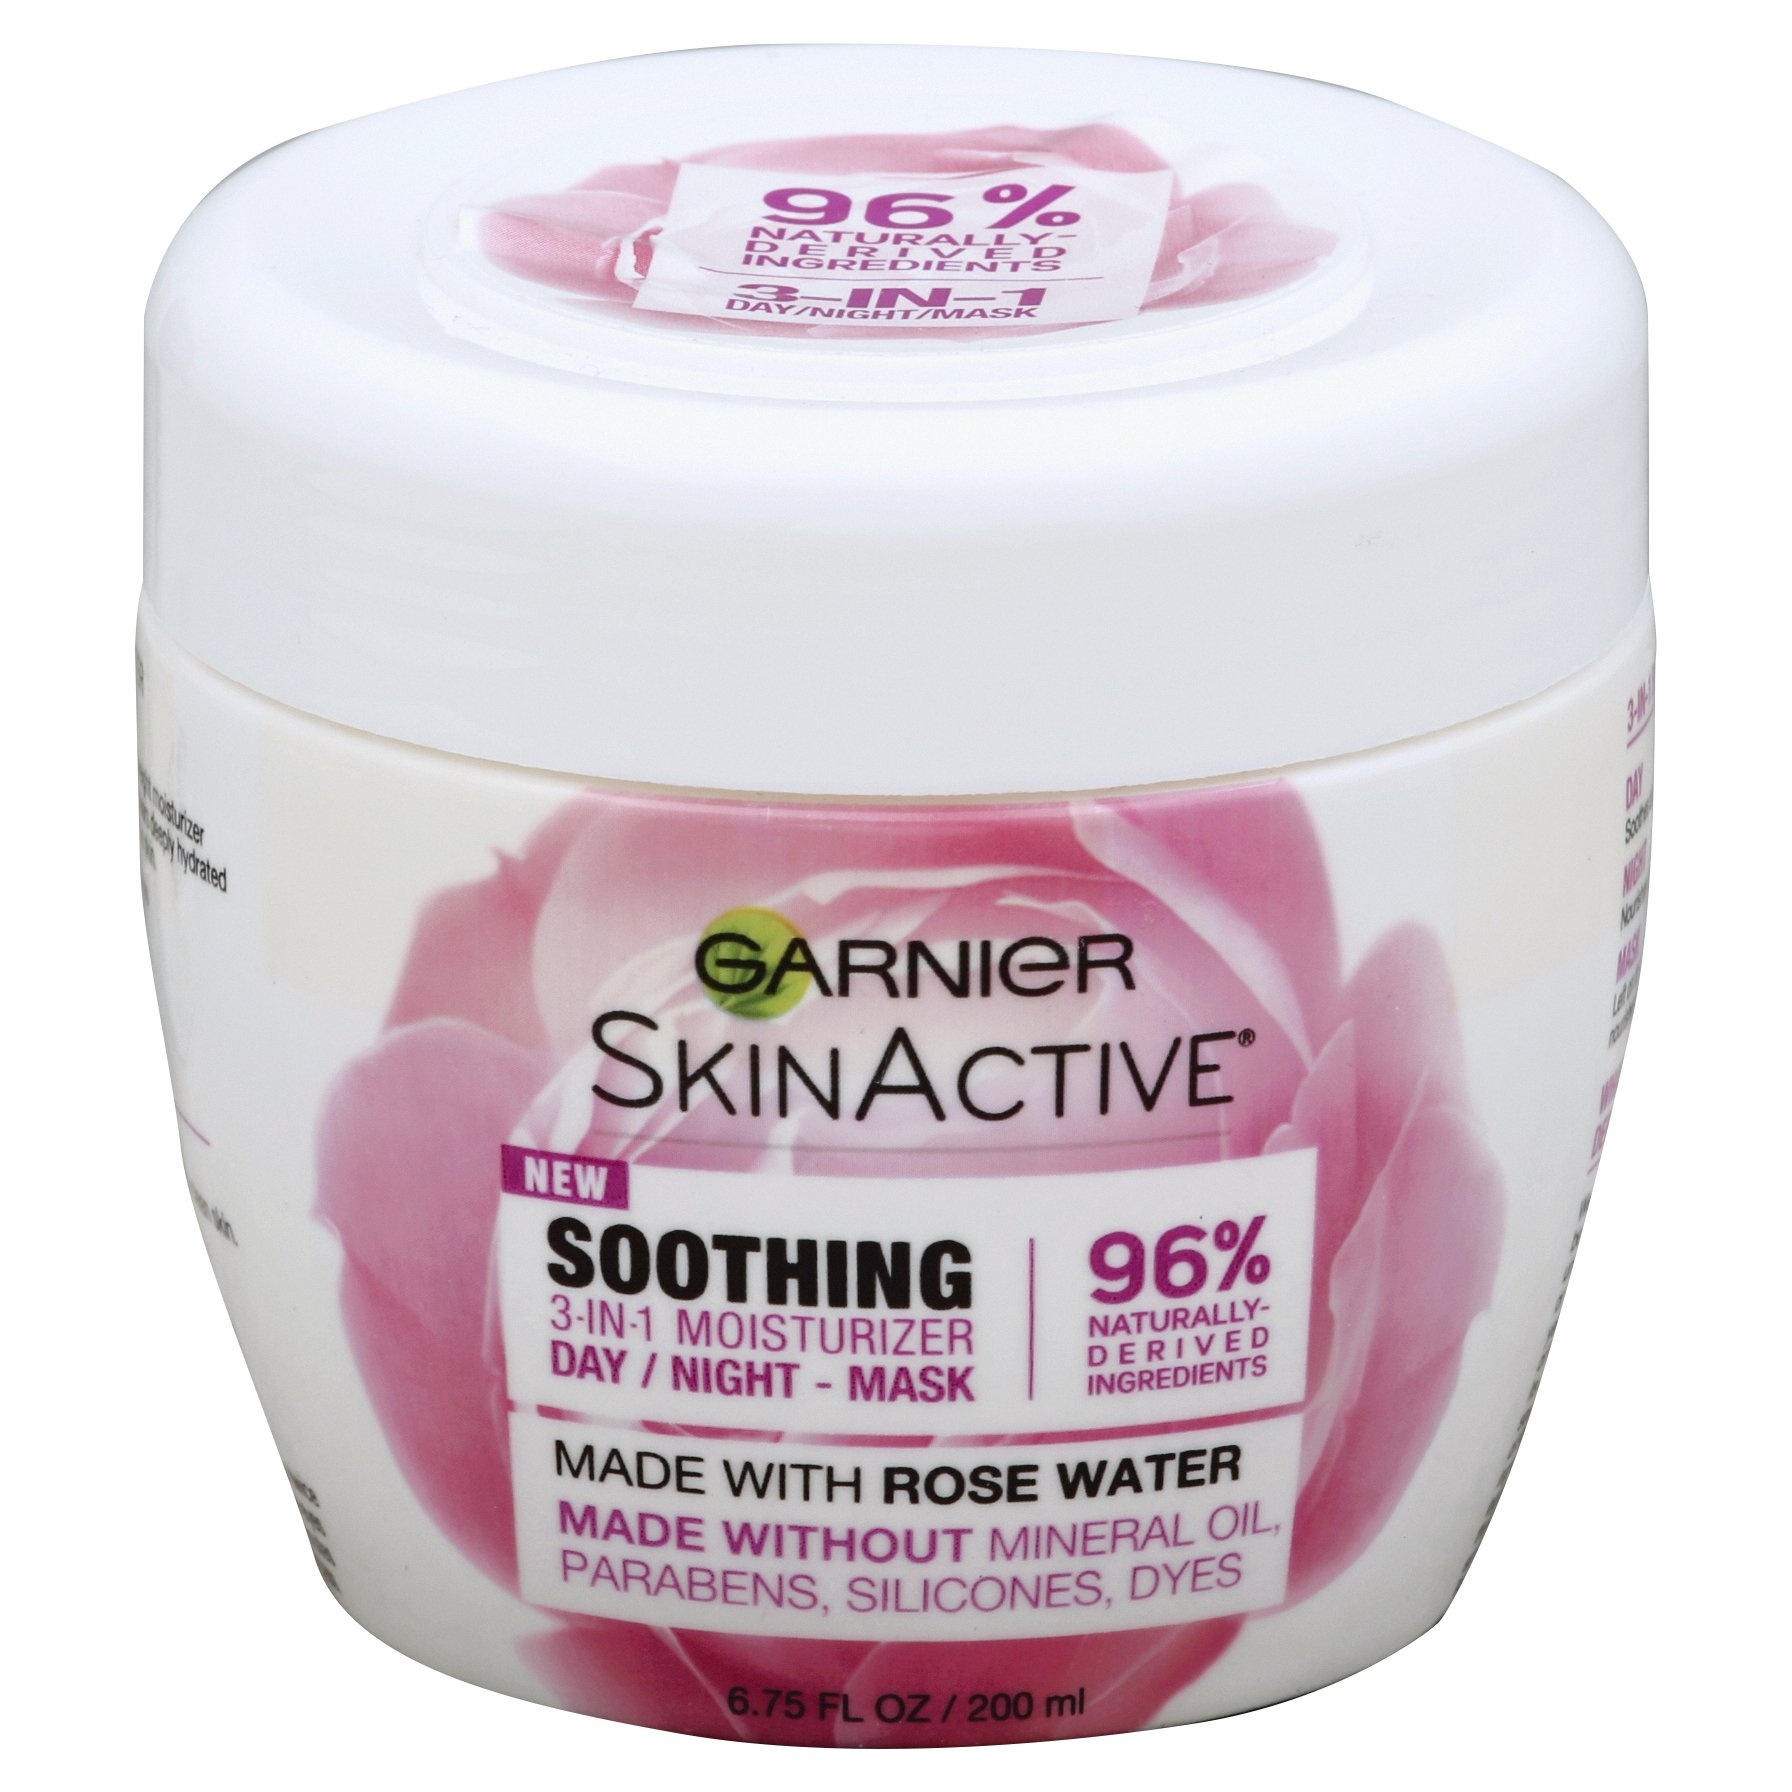 slide 1 of 2, Garnier Skinactive Soothing 3-In-1 Moisturizer Day / Night Mask With Rose Water, 6.75 fl oz